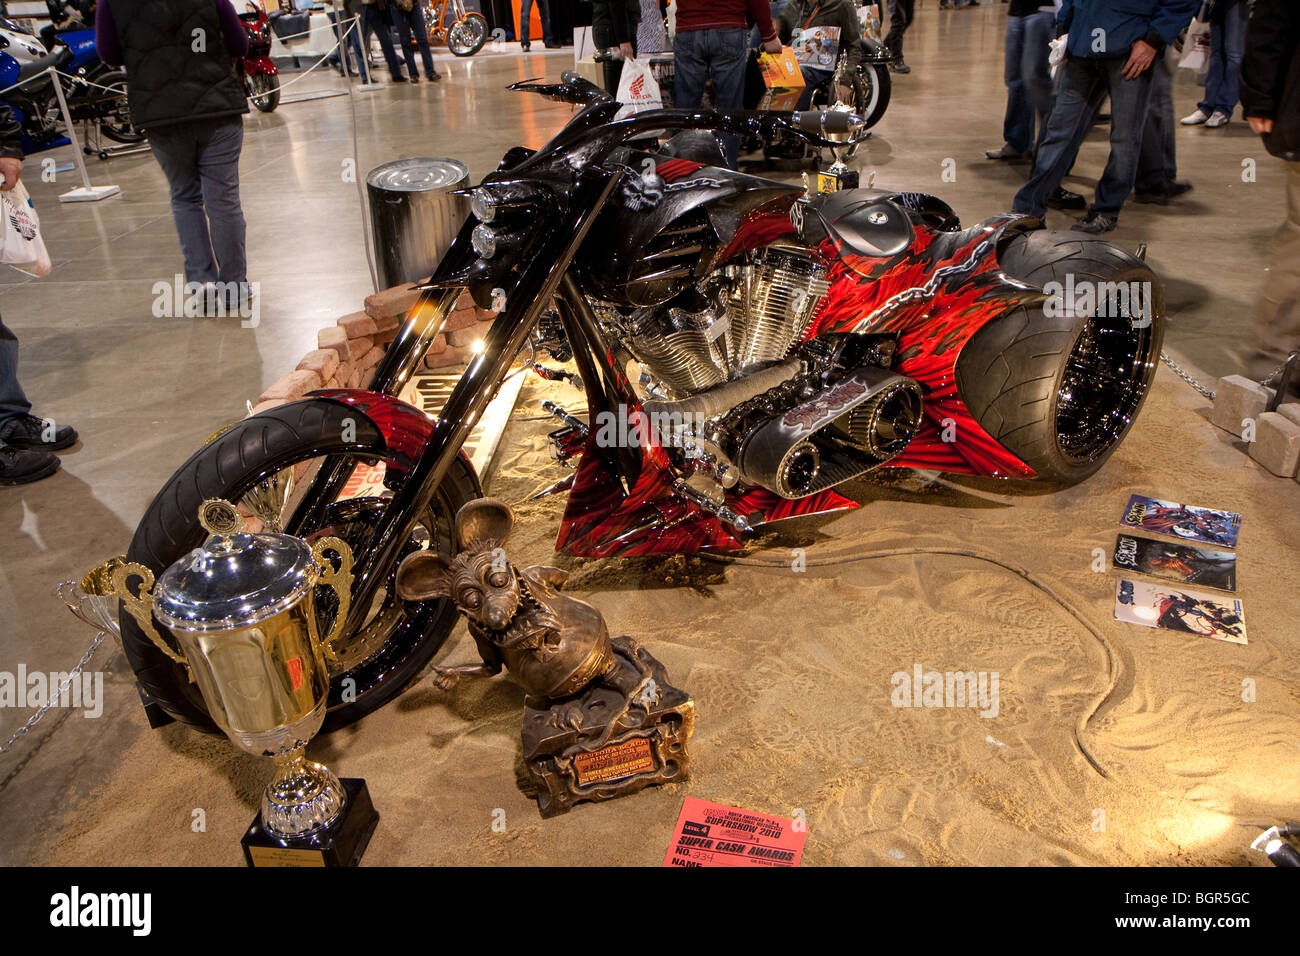 The red three wheel motorbike used in the movie spawn, custom design and built Stock Photo